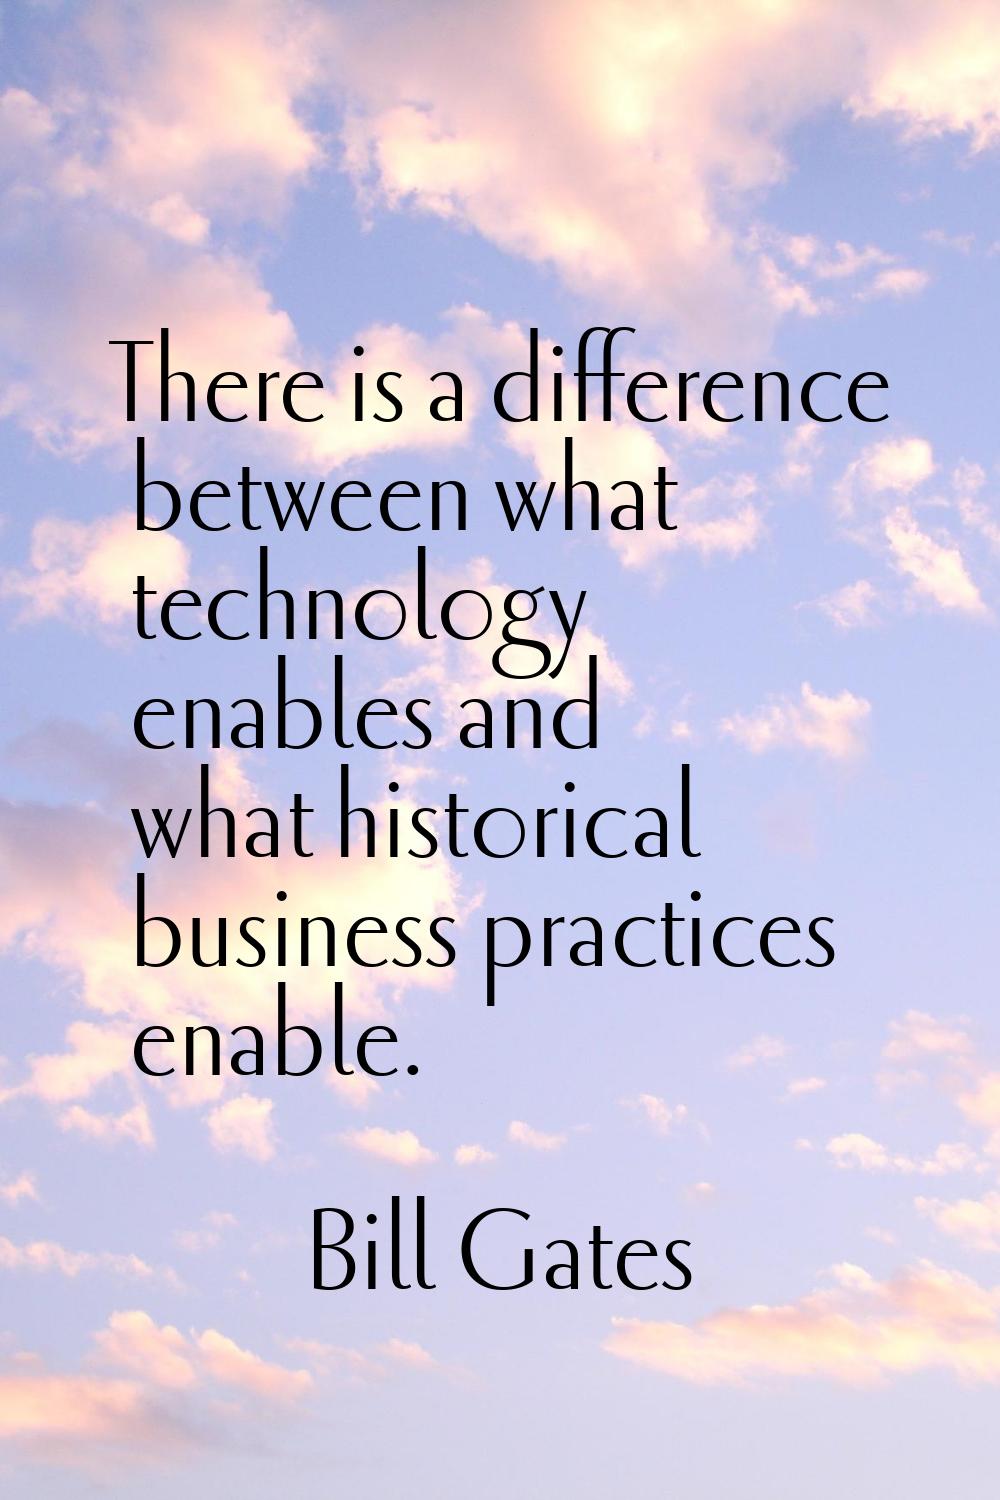 There is a difference between what technology enables and what historical business practices enable